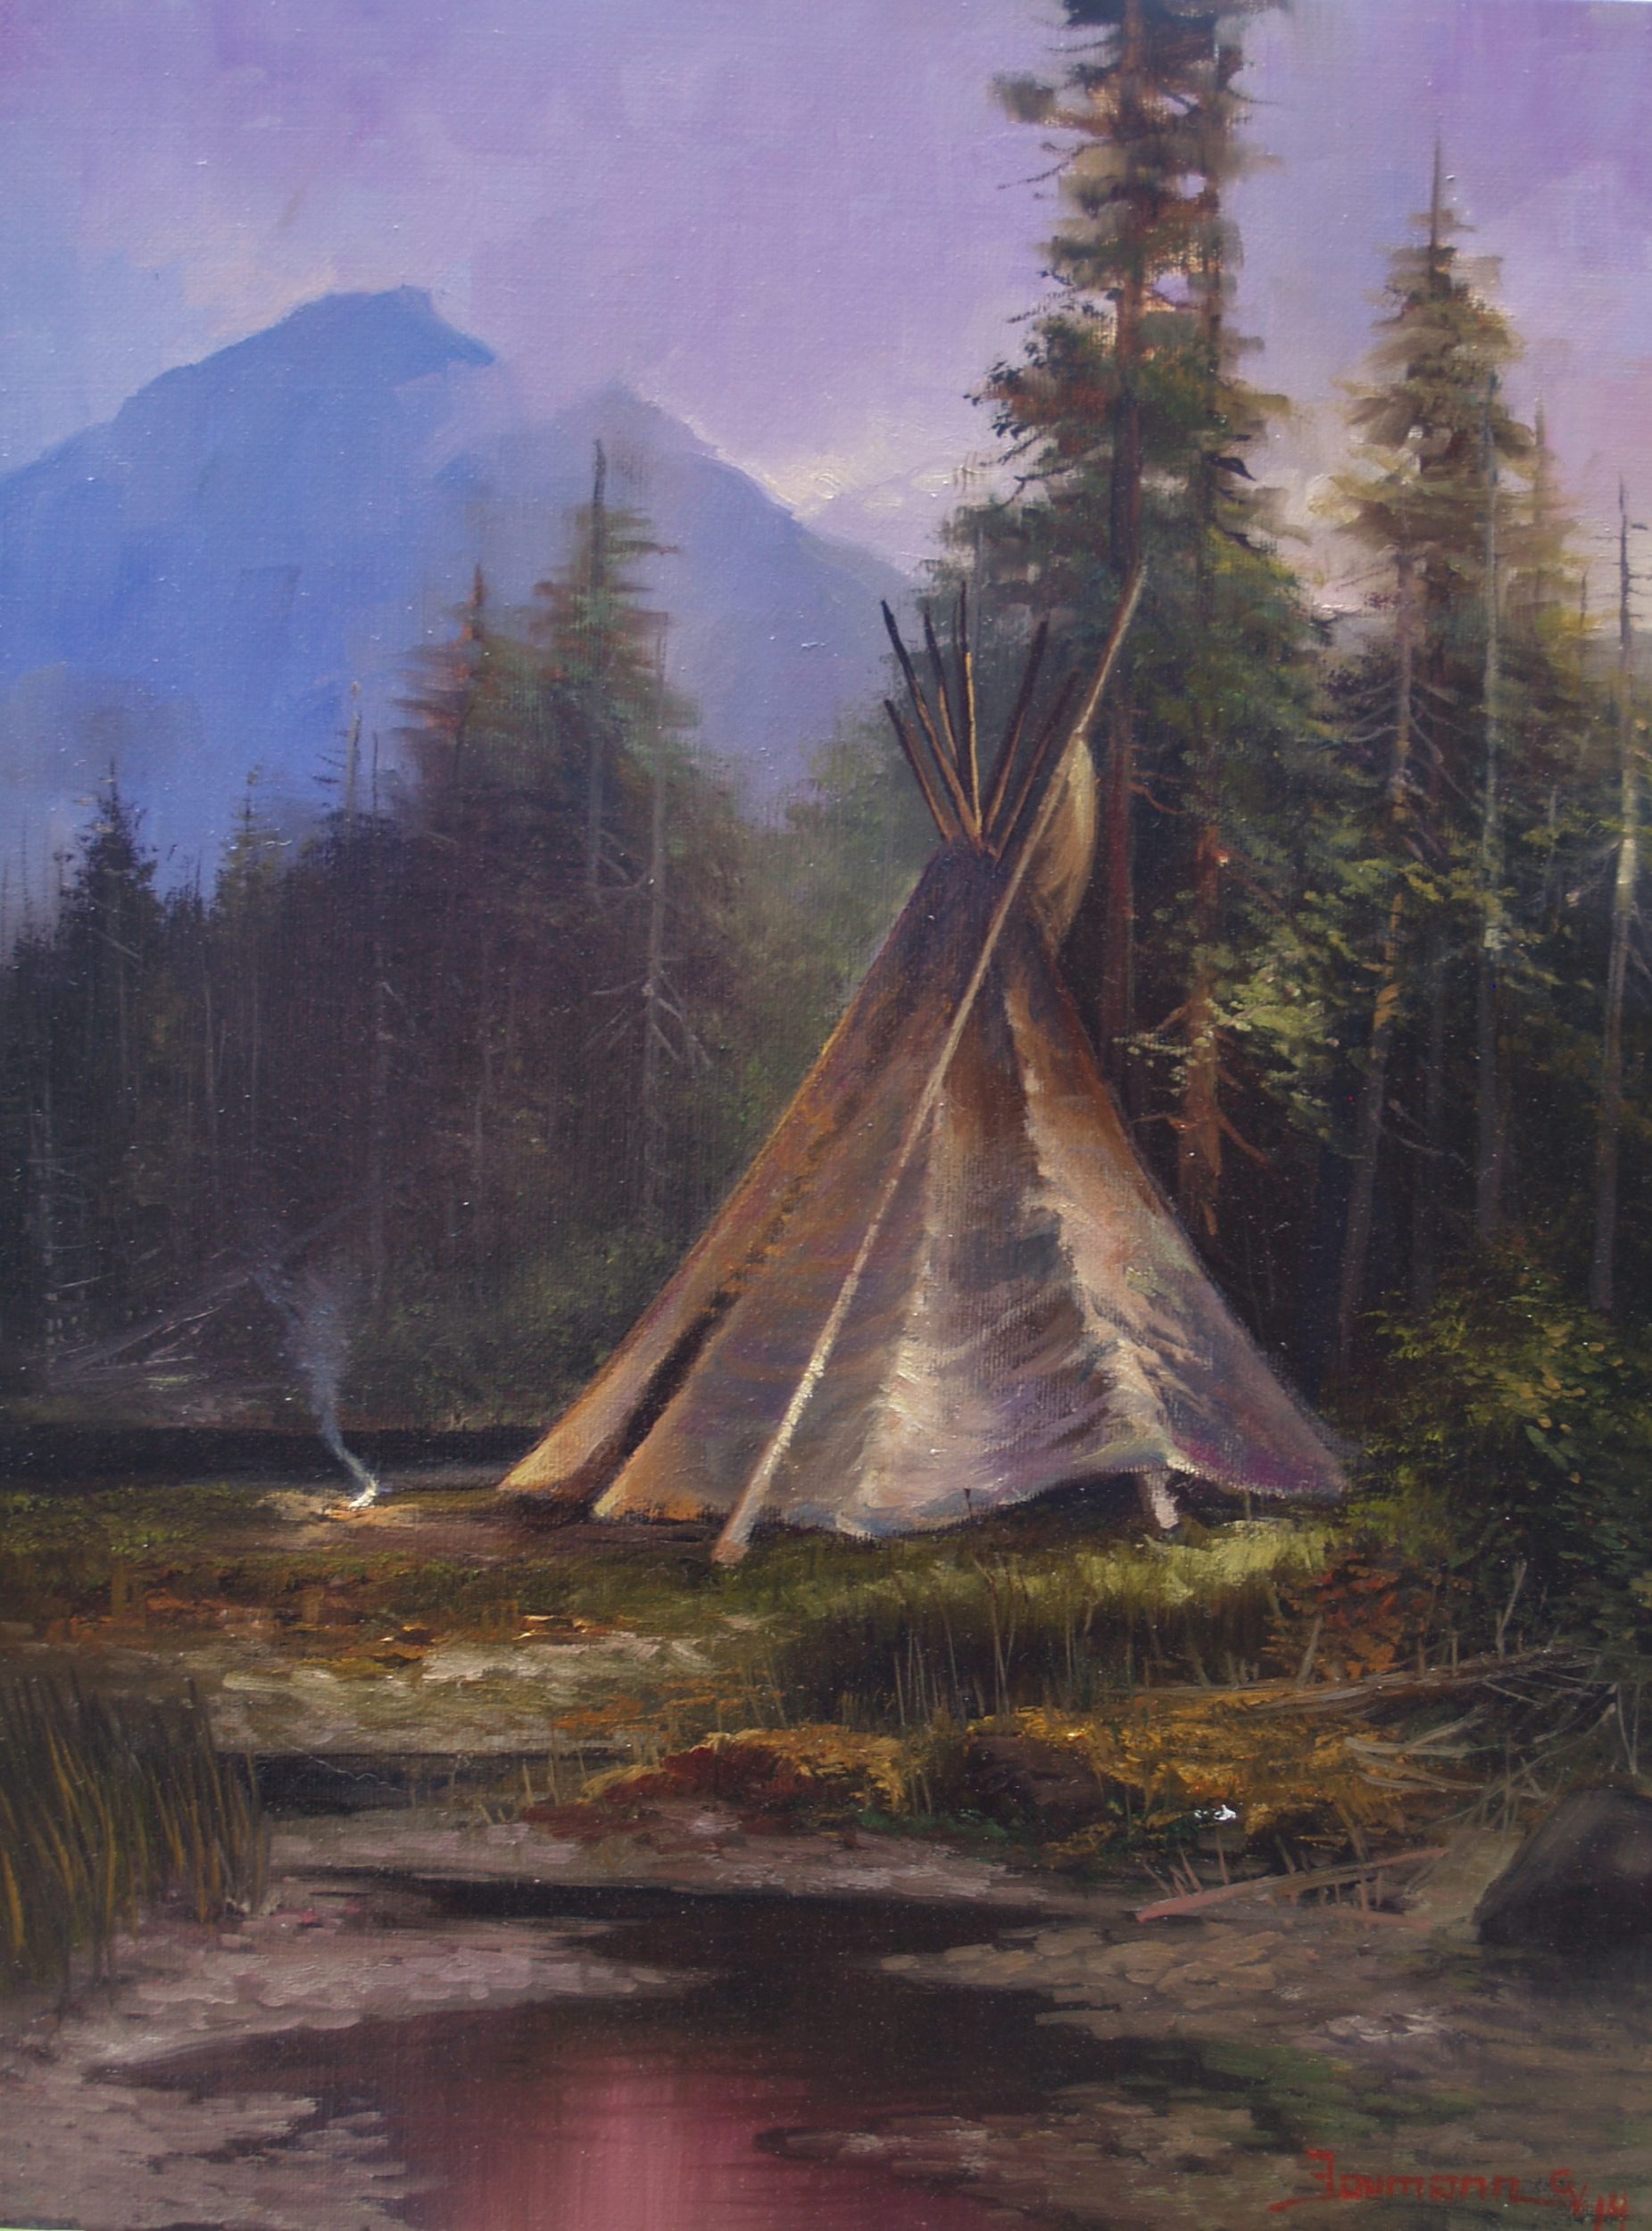 This is a painting by Stefan Baumann of an Native American Indian teepee in camp by a lake in a forest.